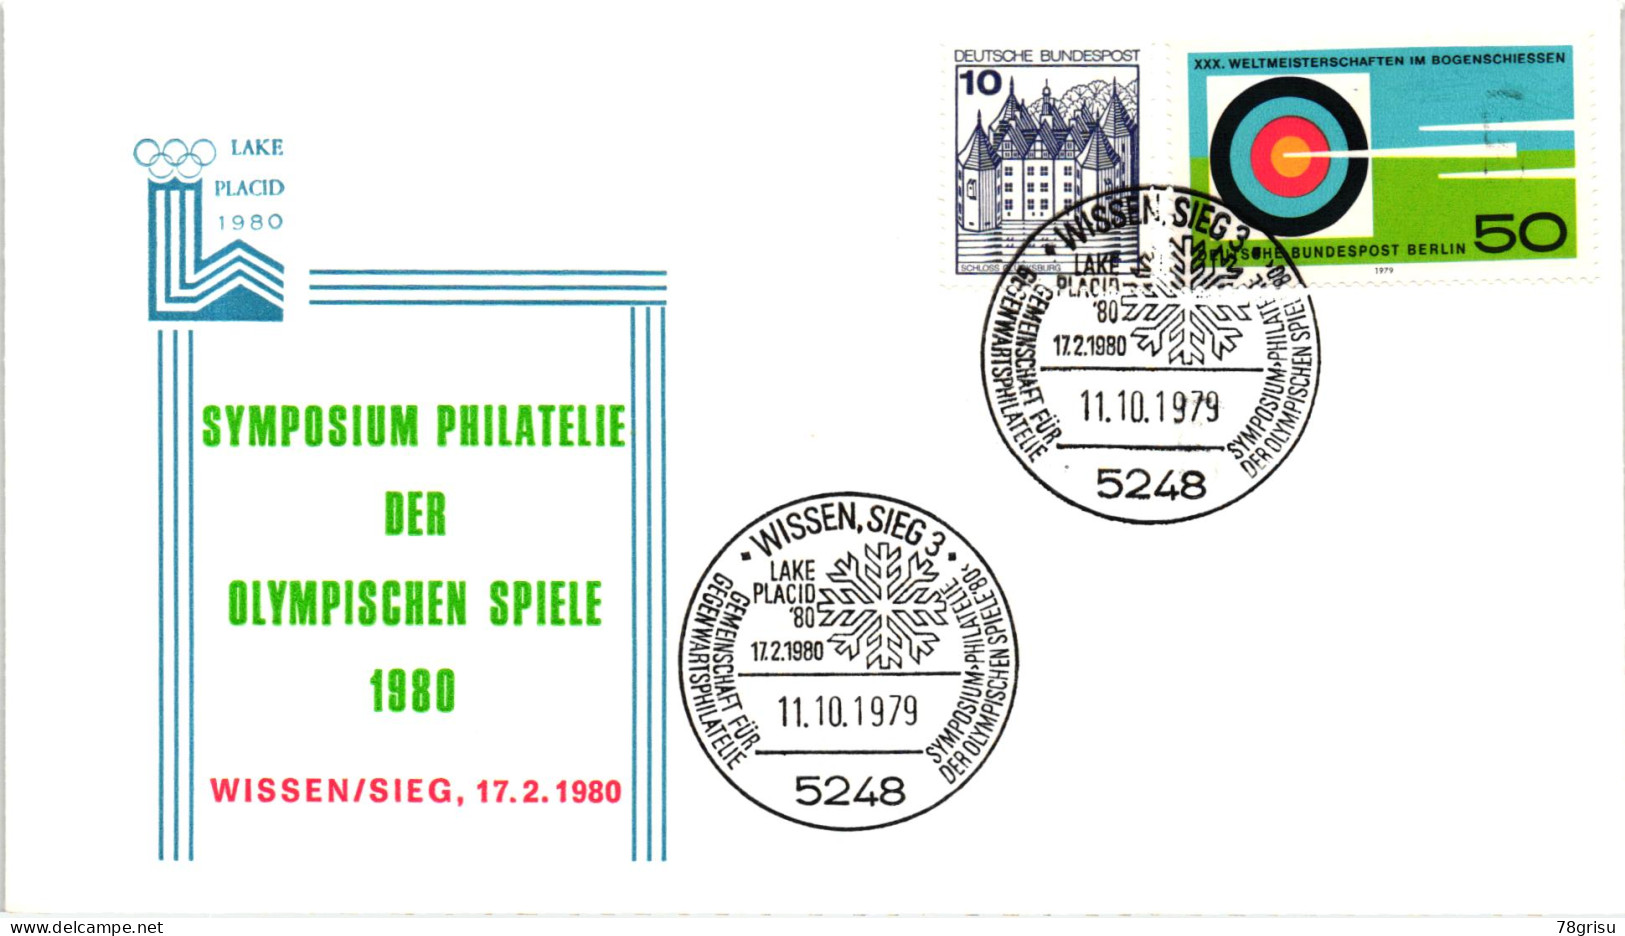 Germany, Wissen Sieg Lake Placid 1980 Olympische Winterspiele Olympic Games - Invierno 1980: Lake Placid